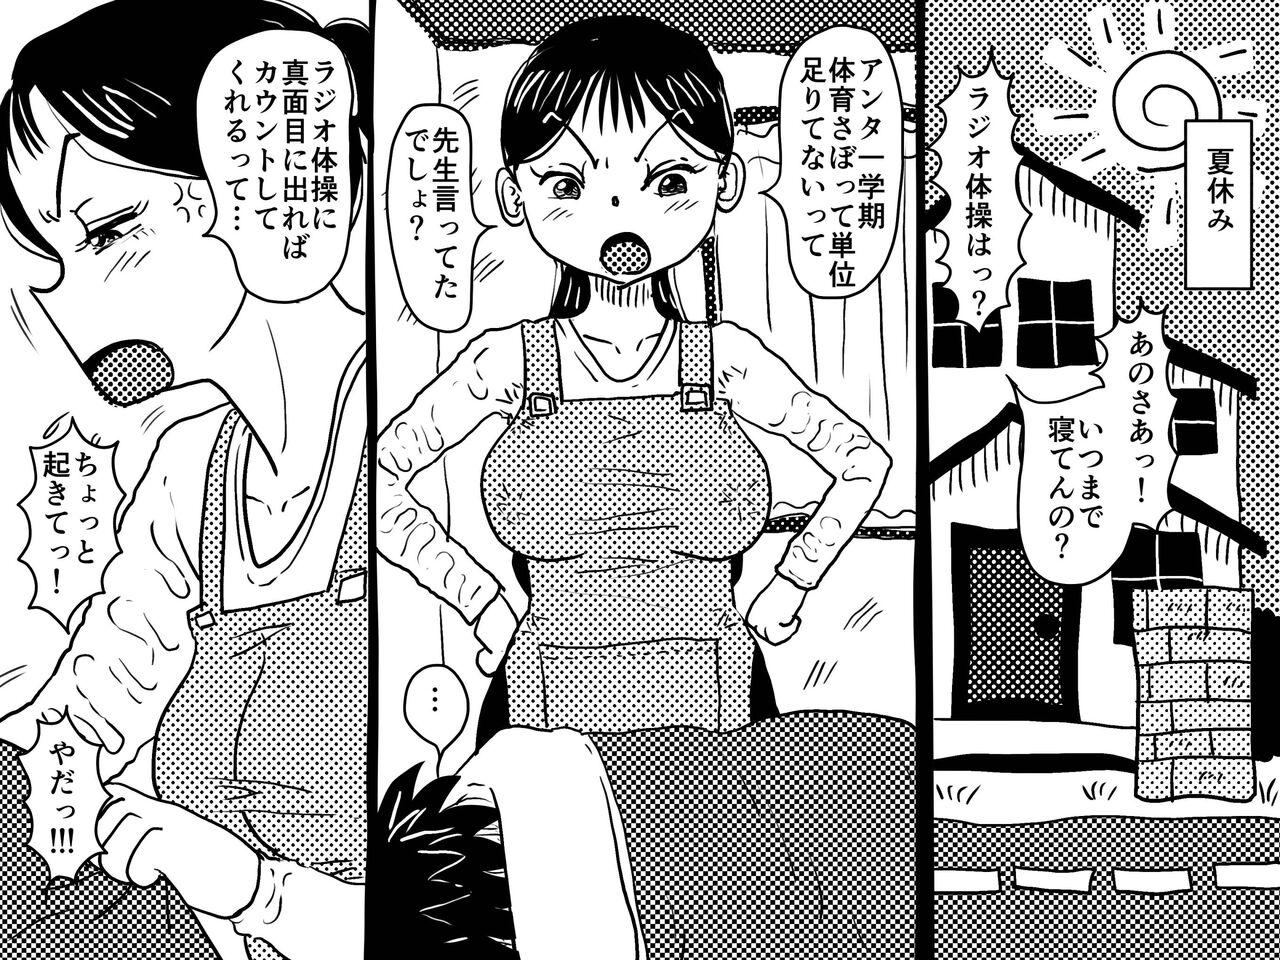 Officesex 「禁断の愛 母子交尾の鎮魂歌」 Verification - Page 2